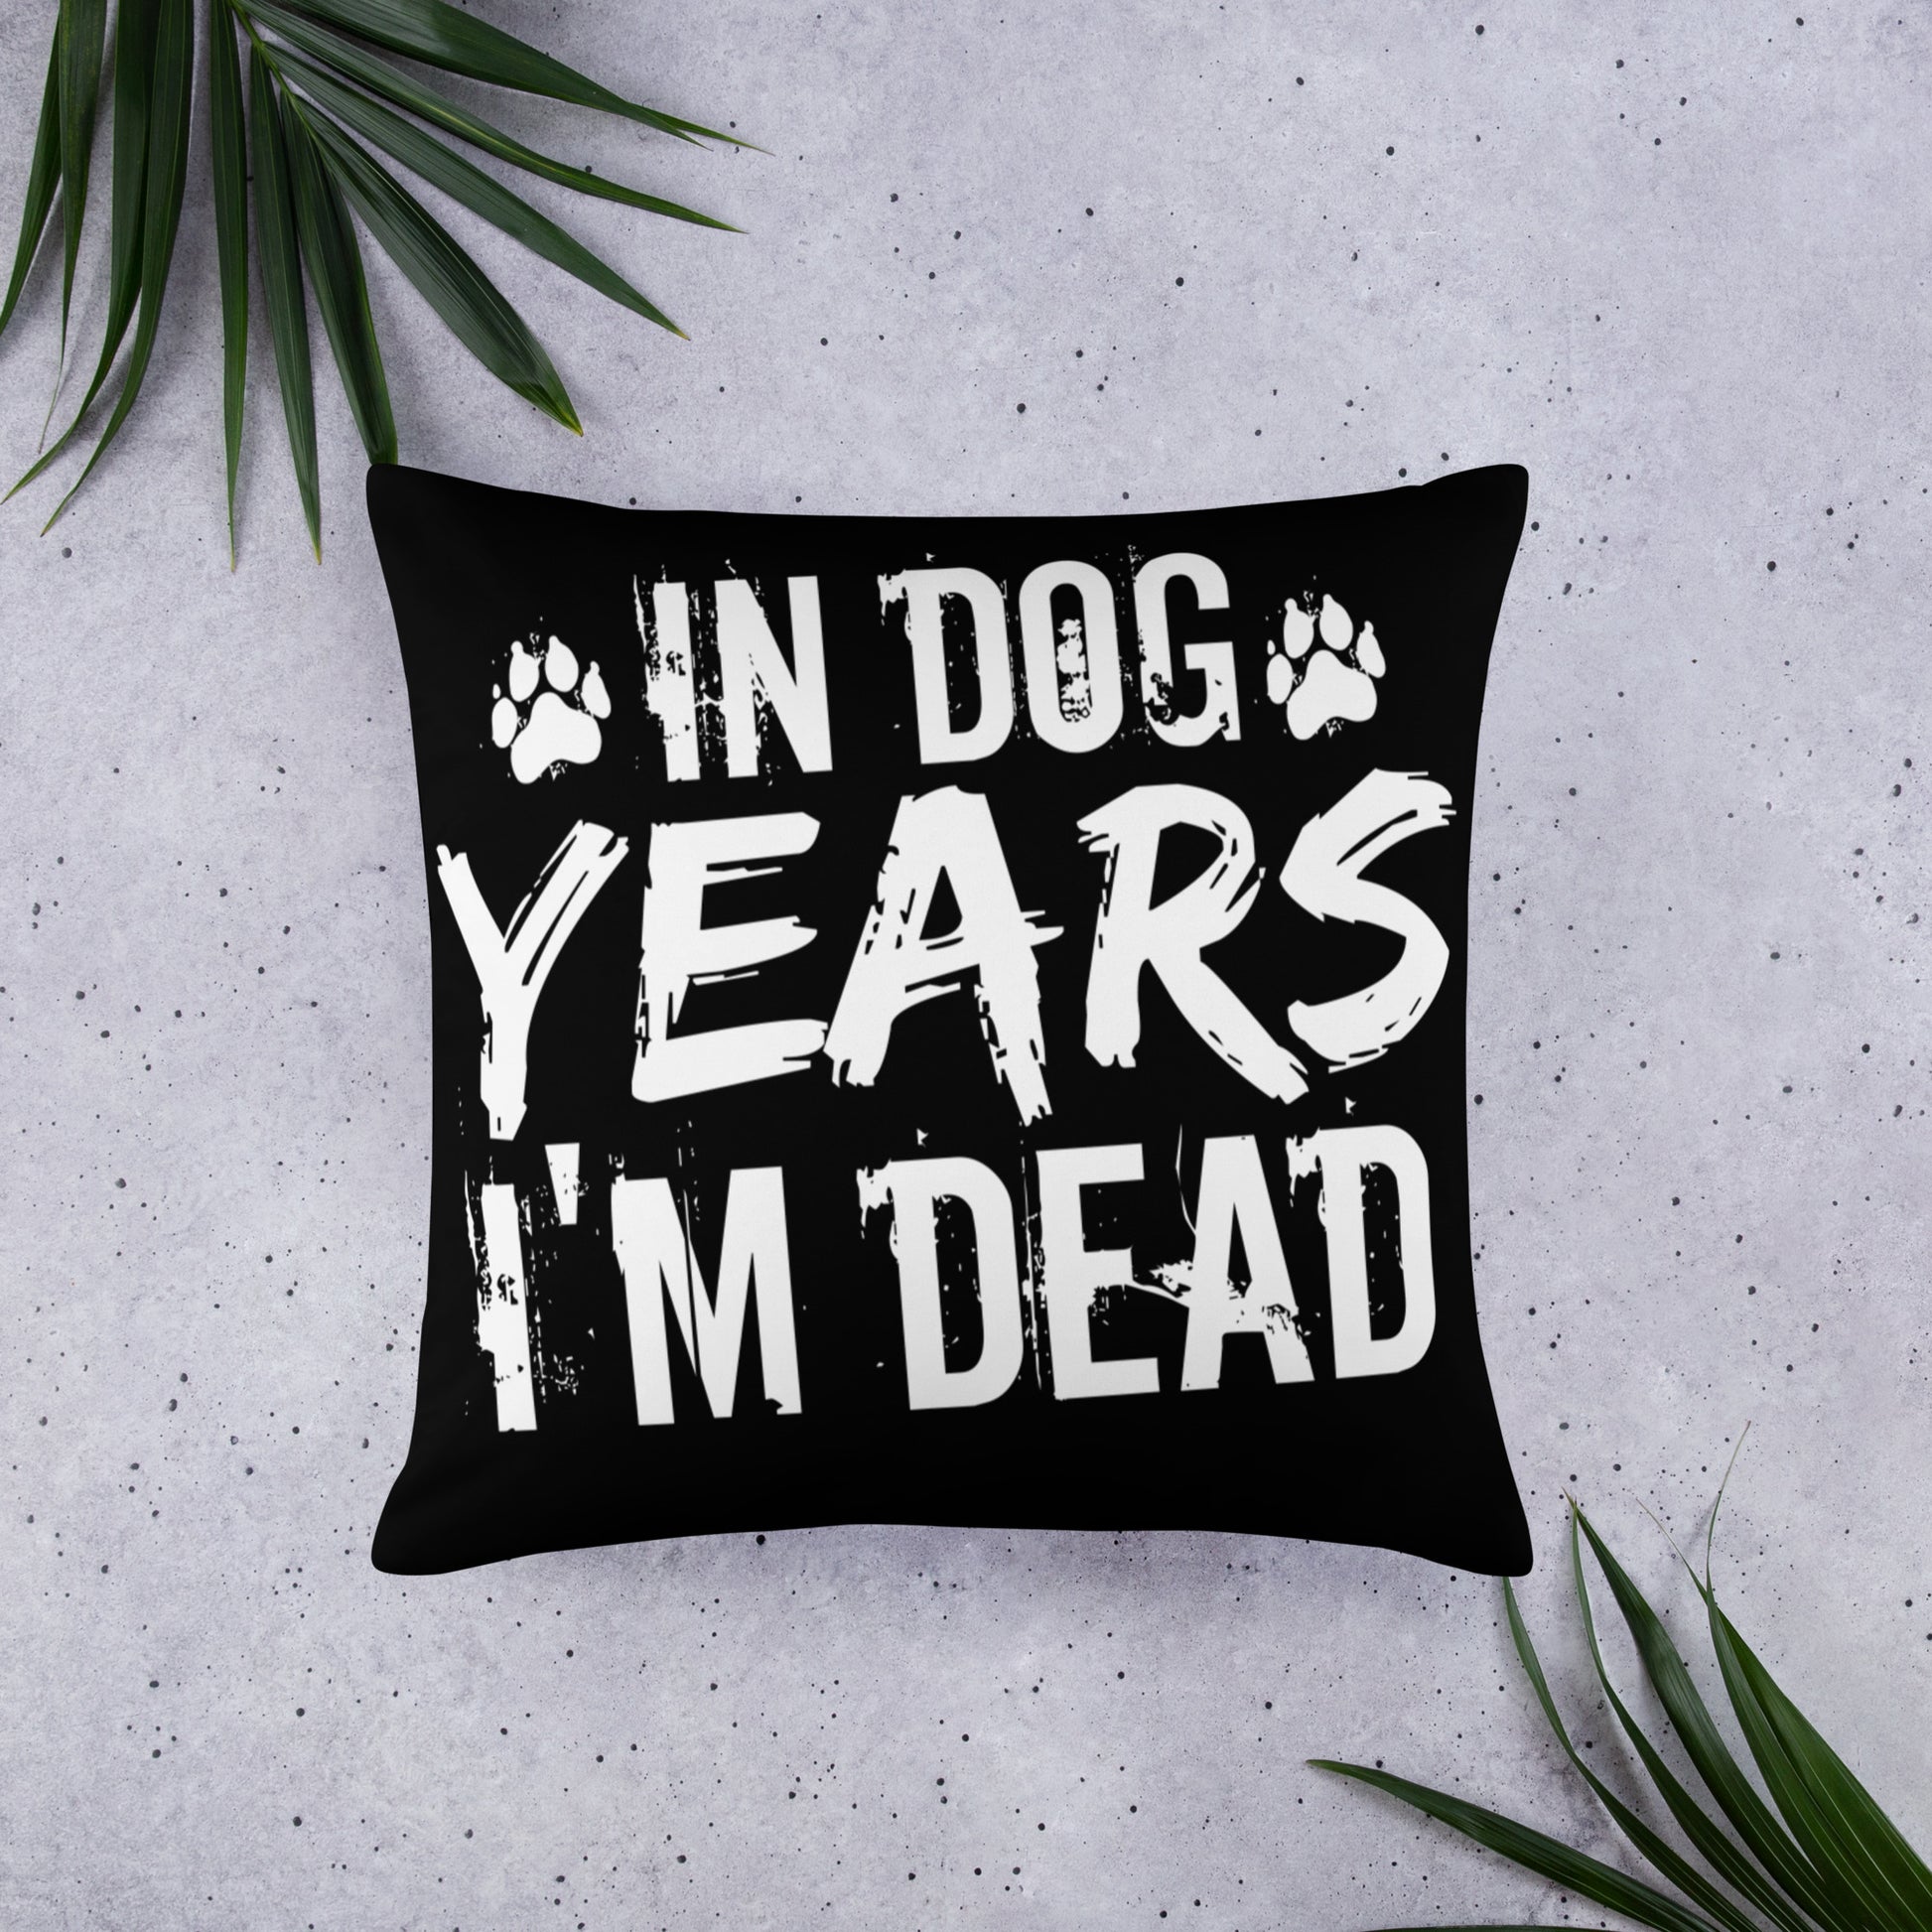 In Dog Years I'm Dead Throw Pillow